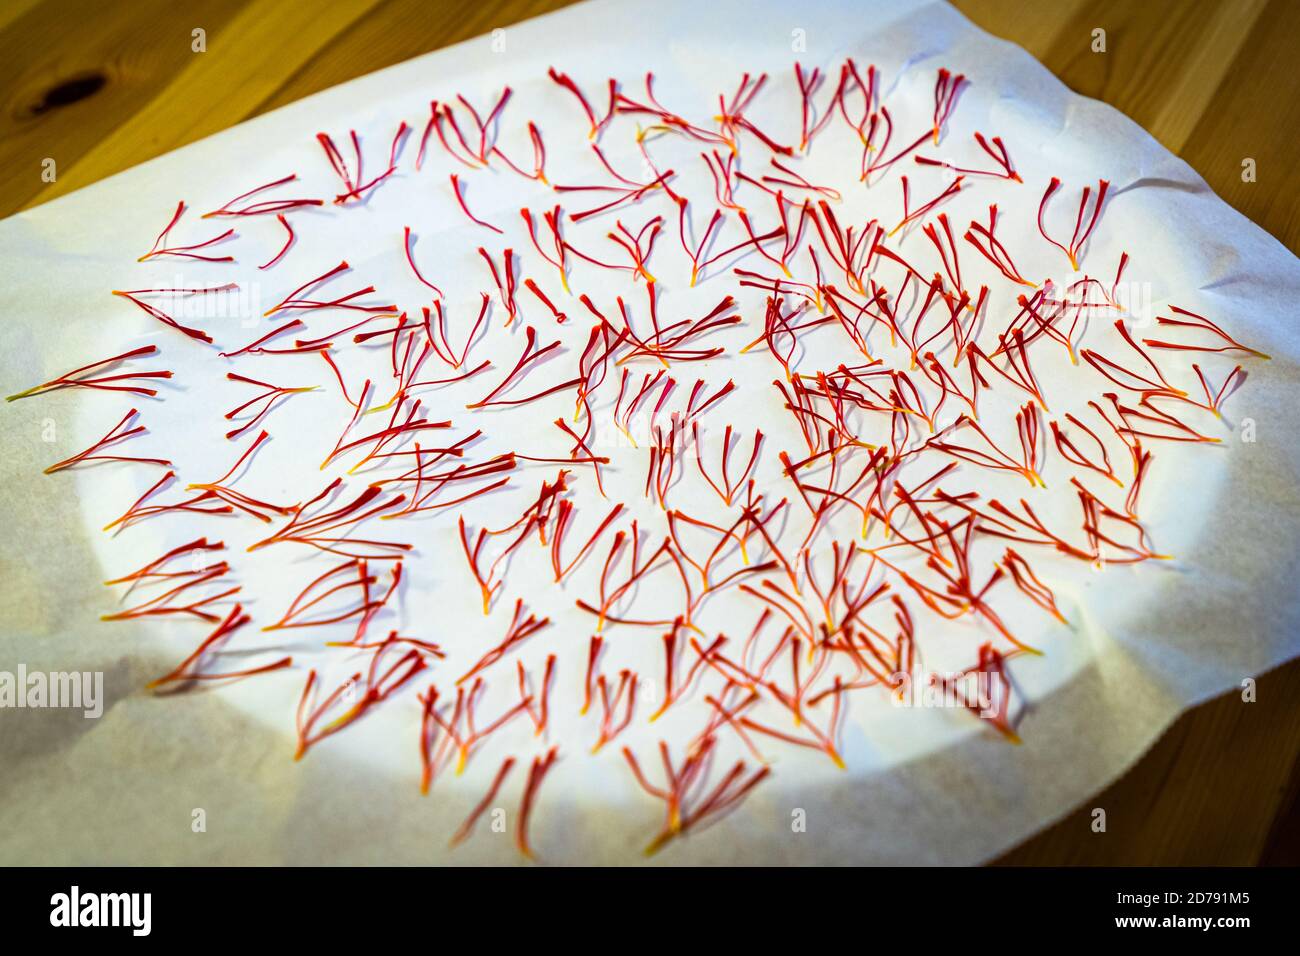 Saffron harvest and processing in Mund, Naters, Switzerland. The daily yield is dried in the house and reduces its weight to one third within a day Stock Photo